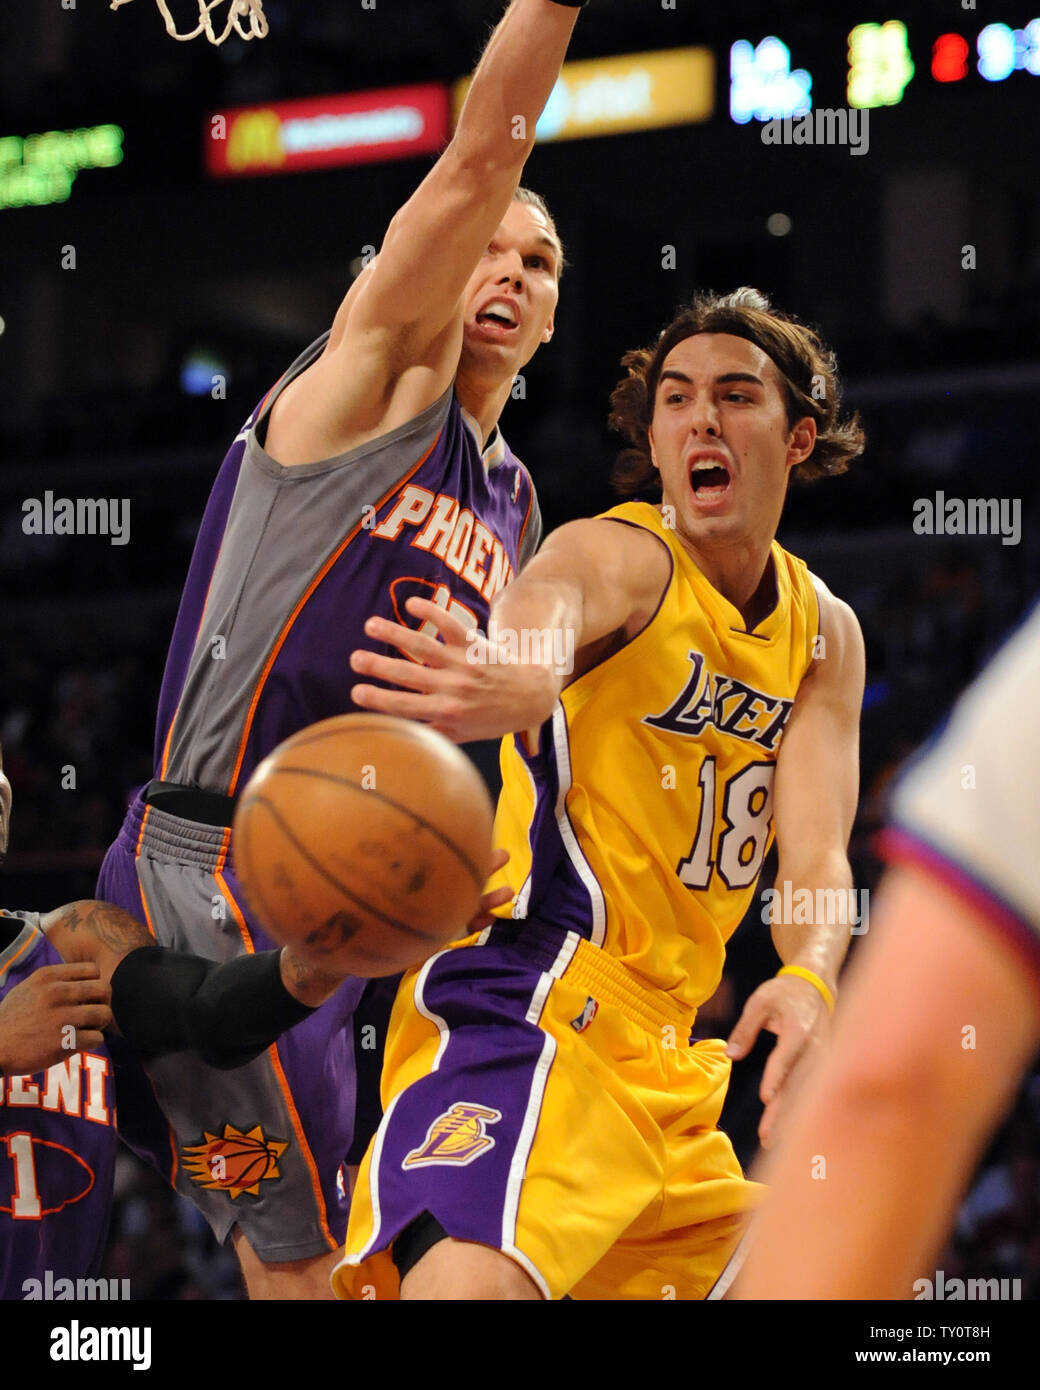 Los Angeles Lakers' Sasha Vujacic (R) passes the ball around Phoenix Suns'  Louis Amundson during first half action at Staples Center in Los Angeles on December 10, 2008.  (UPI Photo/Jon SooHoo) Stock Photo